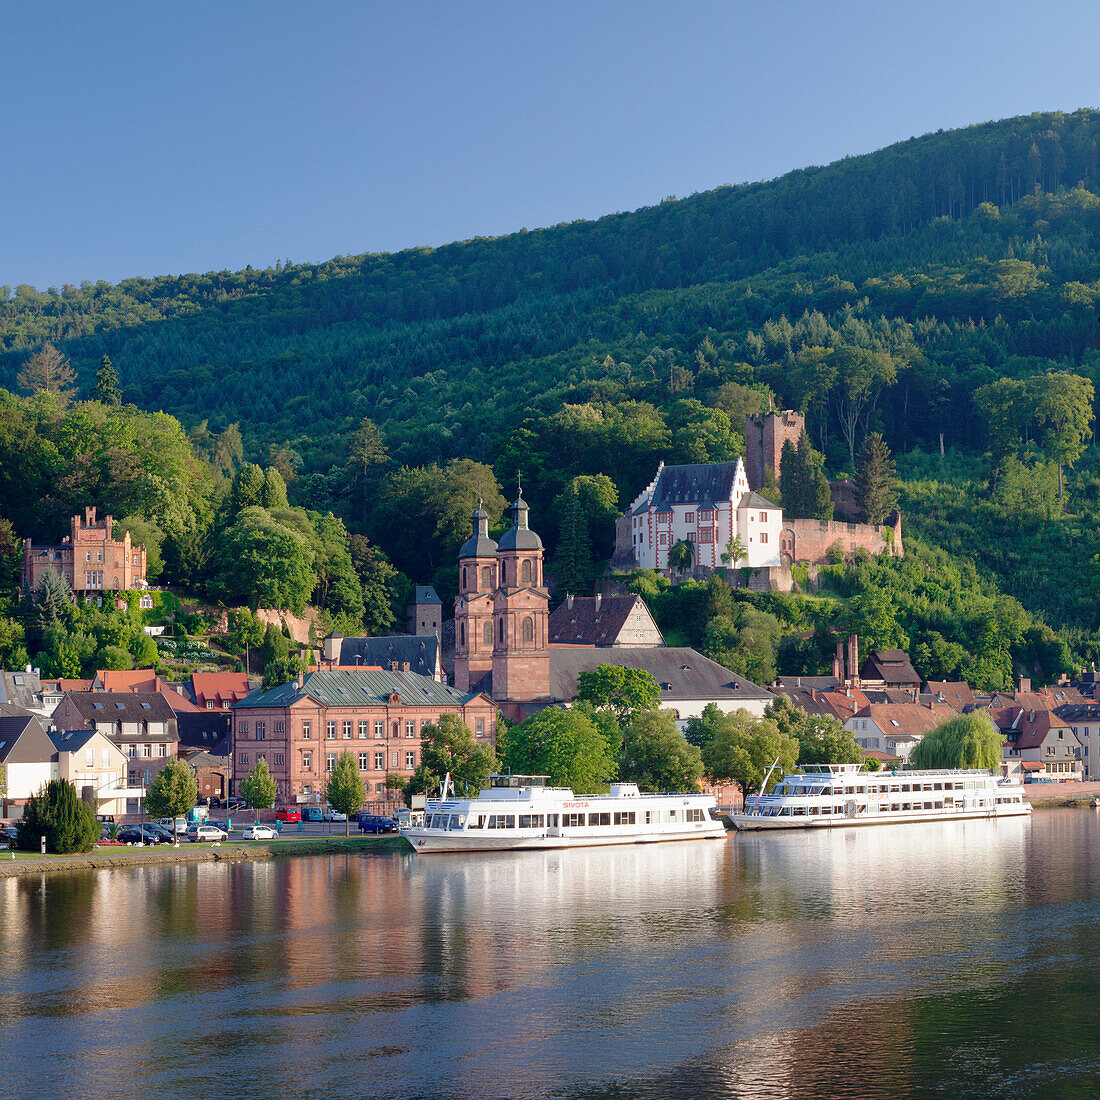 Mildenburg Castle and Parish Church of St. Jakobus, excursion boats on Main River, old town of Miltenberg, Franconia, Bavaria, Germany, Europe